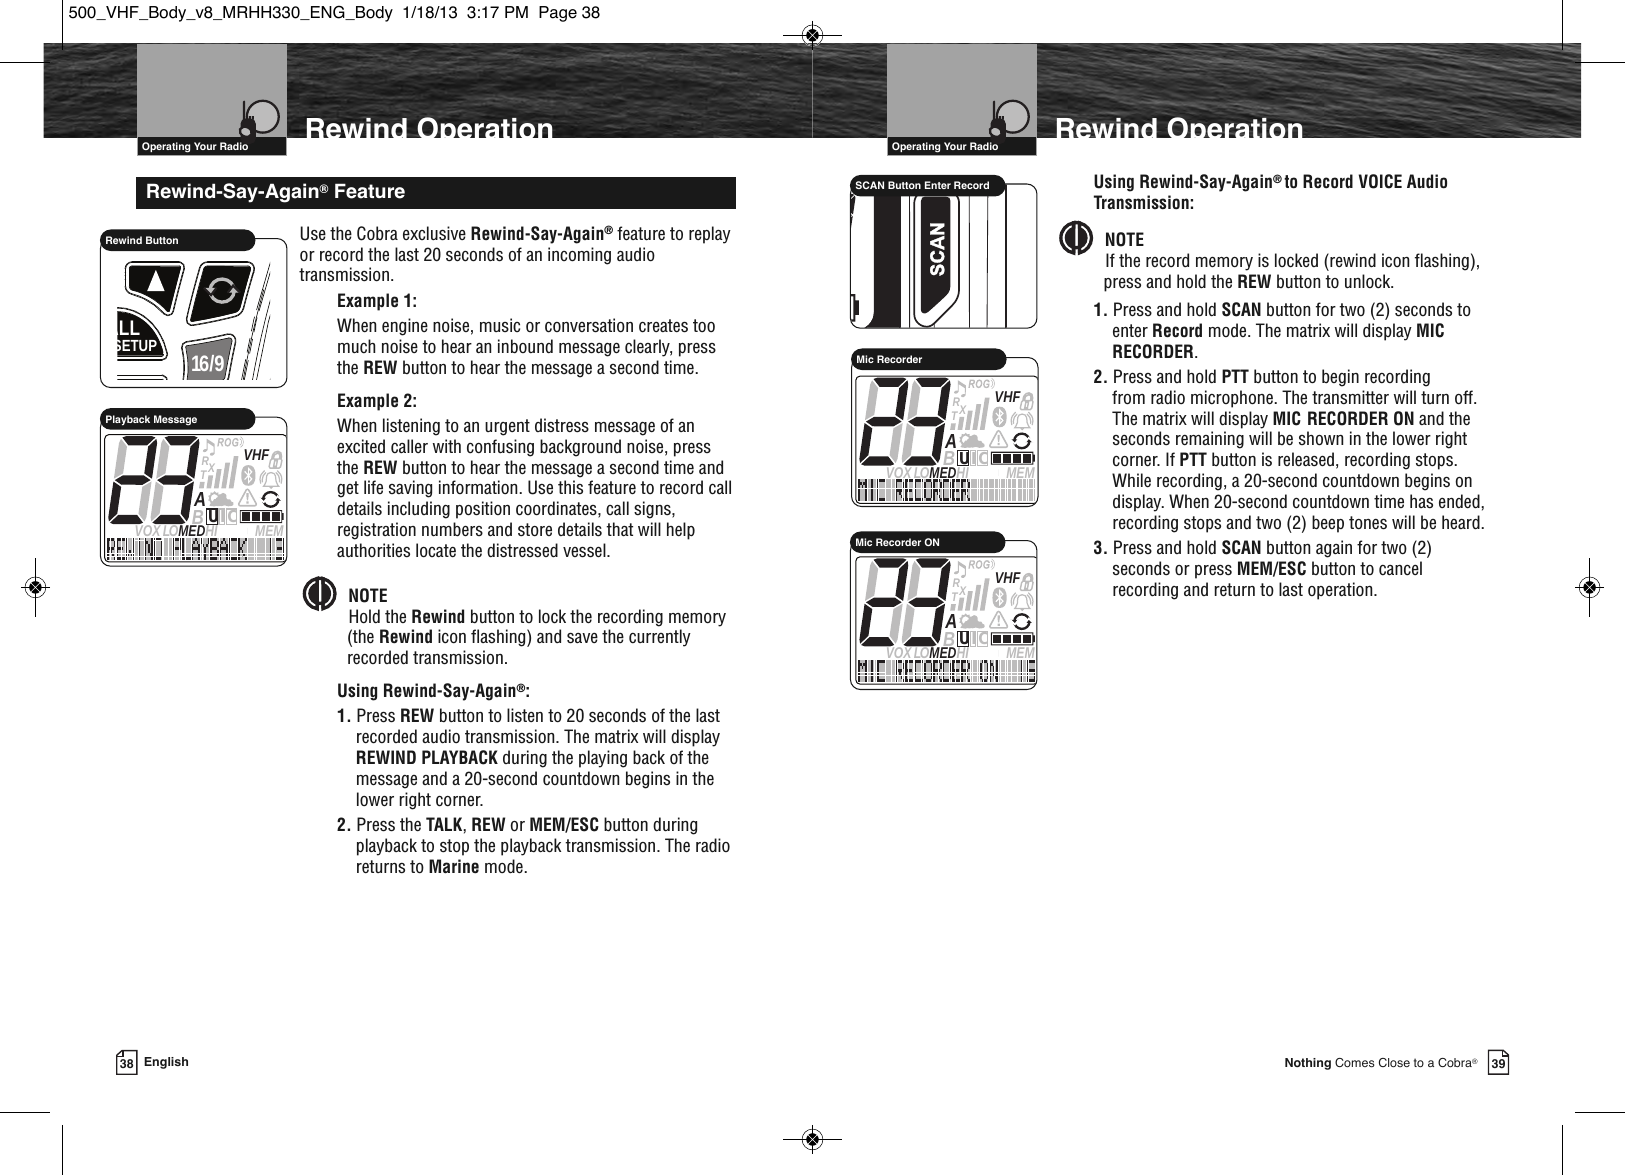 Page 22 of Cobra Electronics MRHH500 BT ACCESSORY IN MARINE RADIO User Manual MRHH330 ENG Body